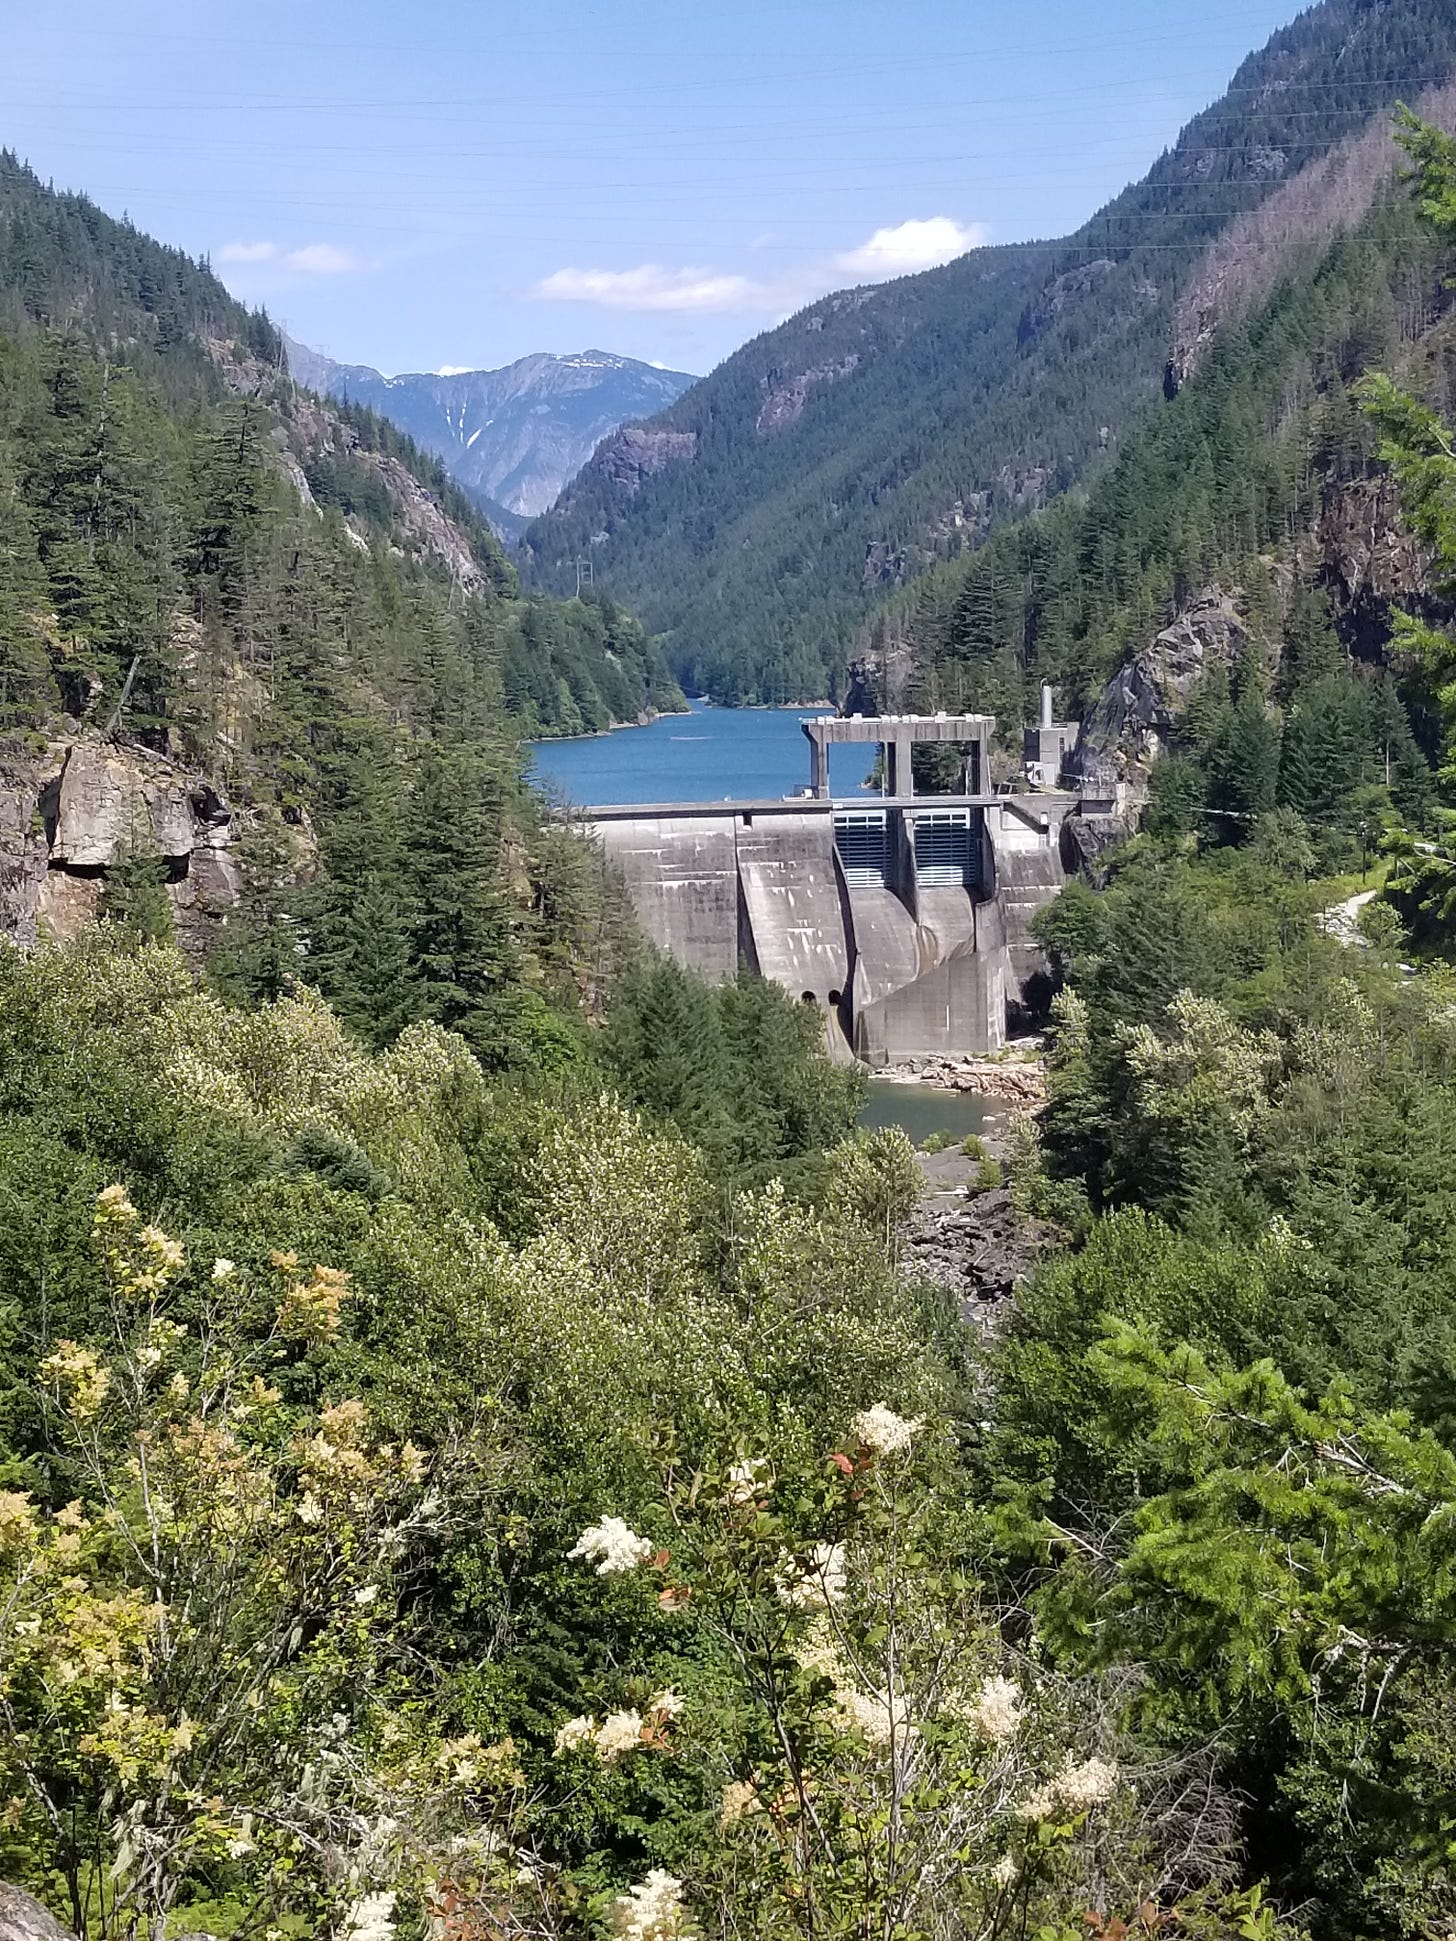 gorge dam in mountain valley, forested mountains and reservoir